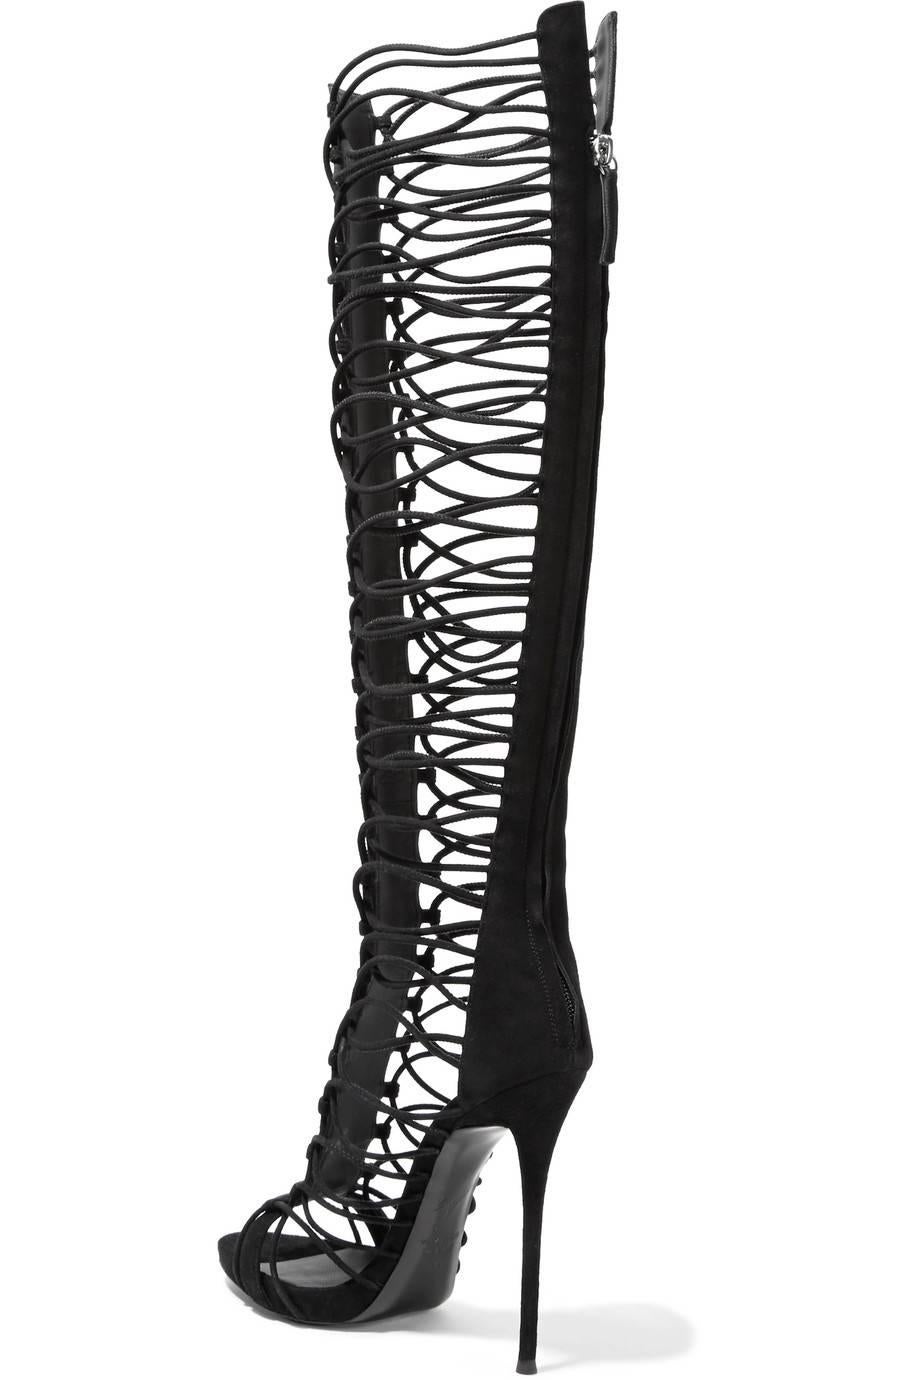 Women's Giuseppe Zanotti New Black Suede Cut Out Knee High Boots W/Box